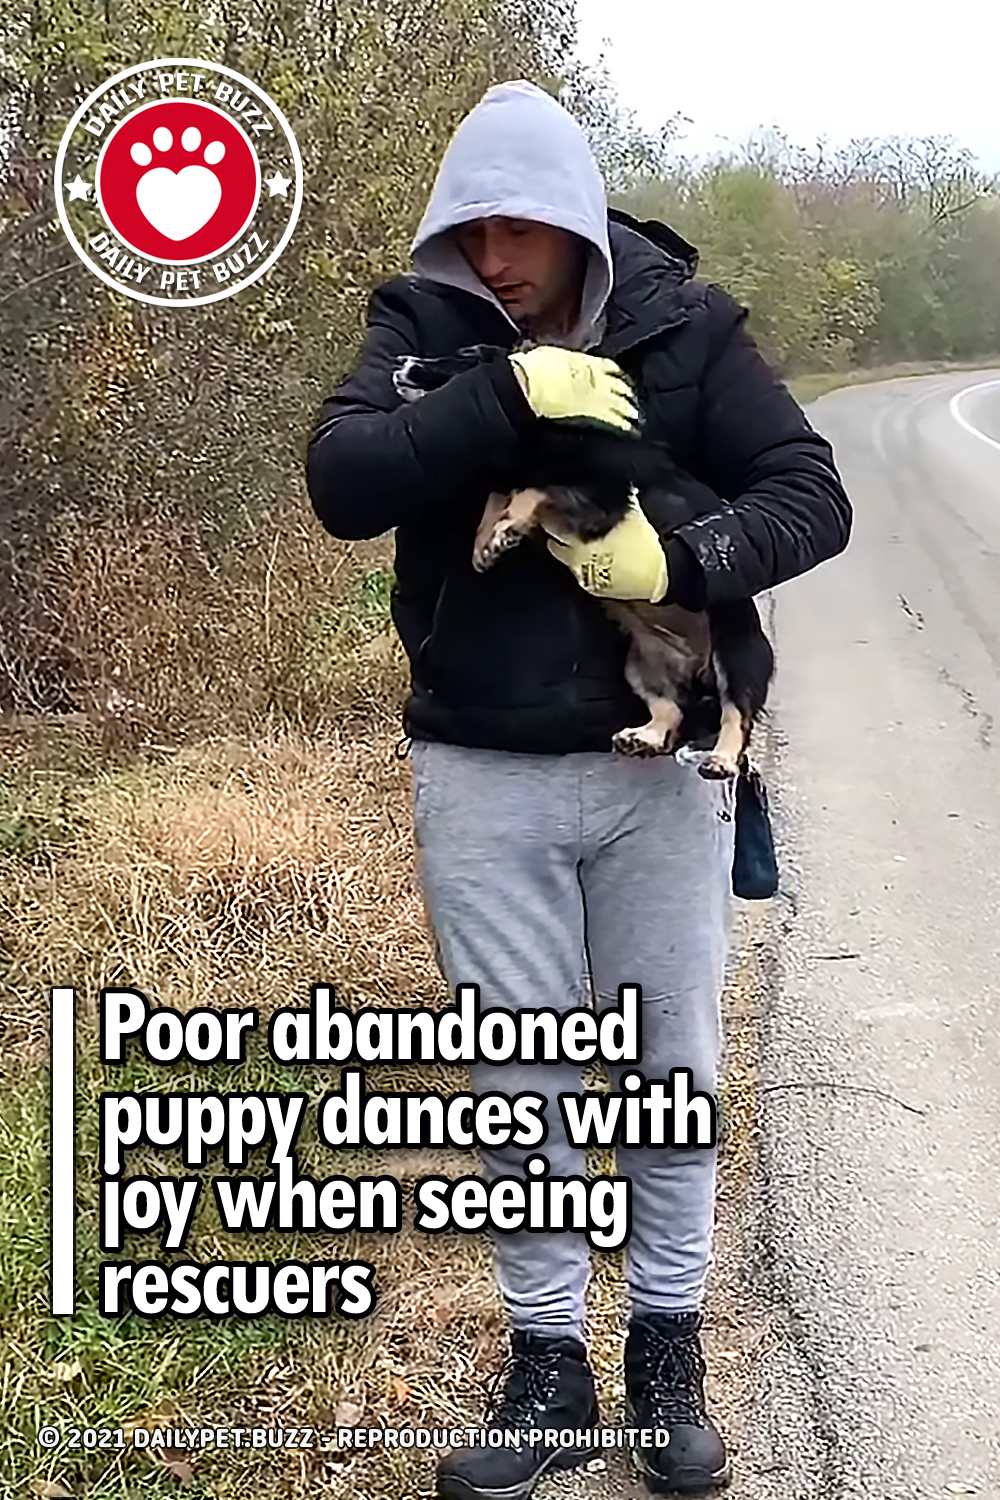 Poor abandoned puppy dances with joy when seeing rescuers